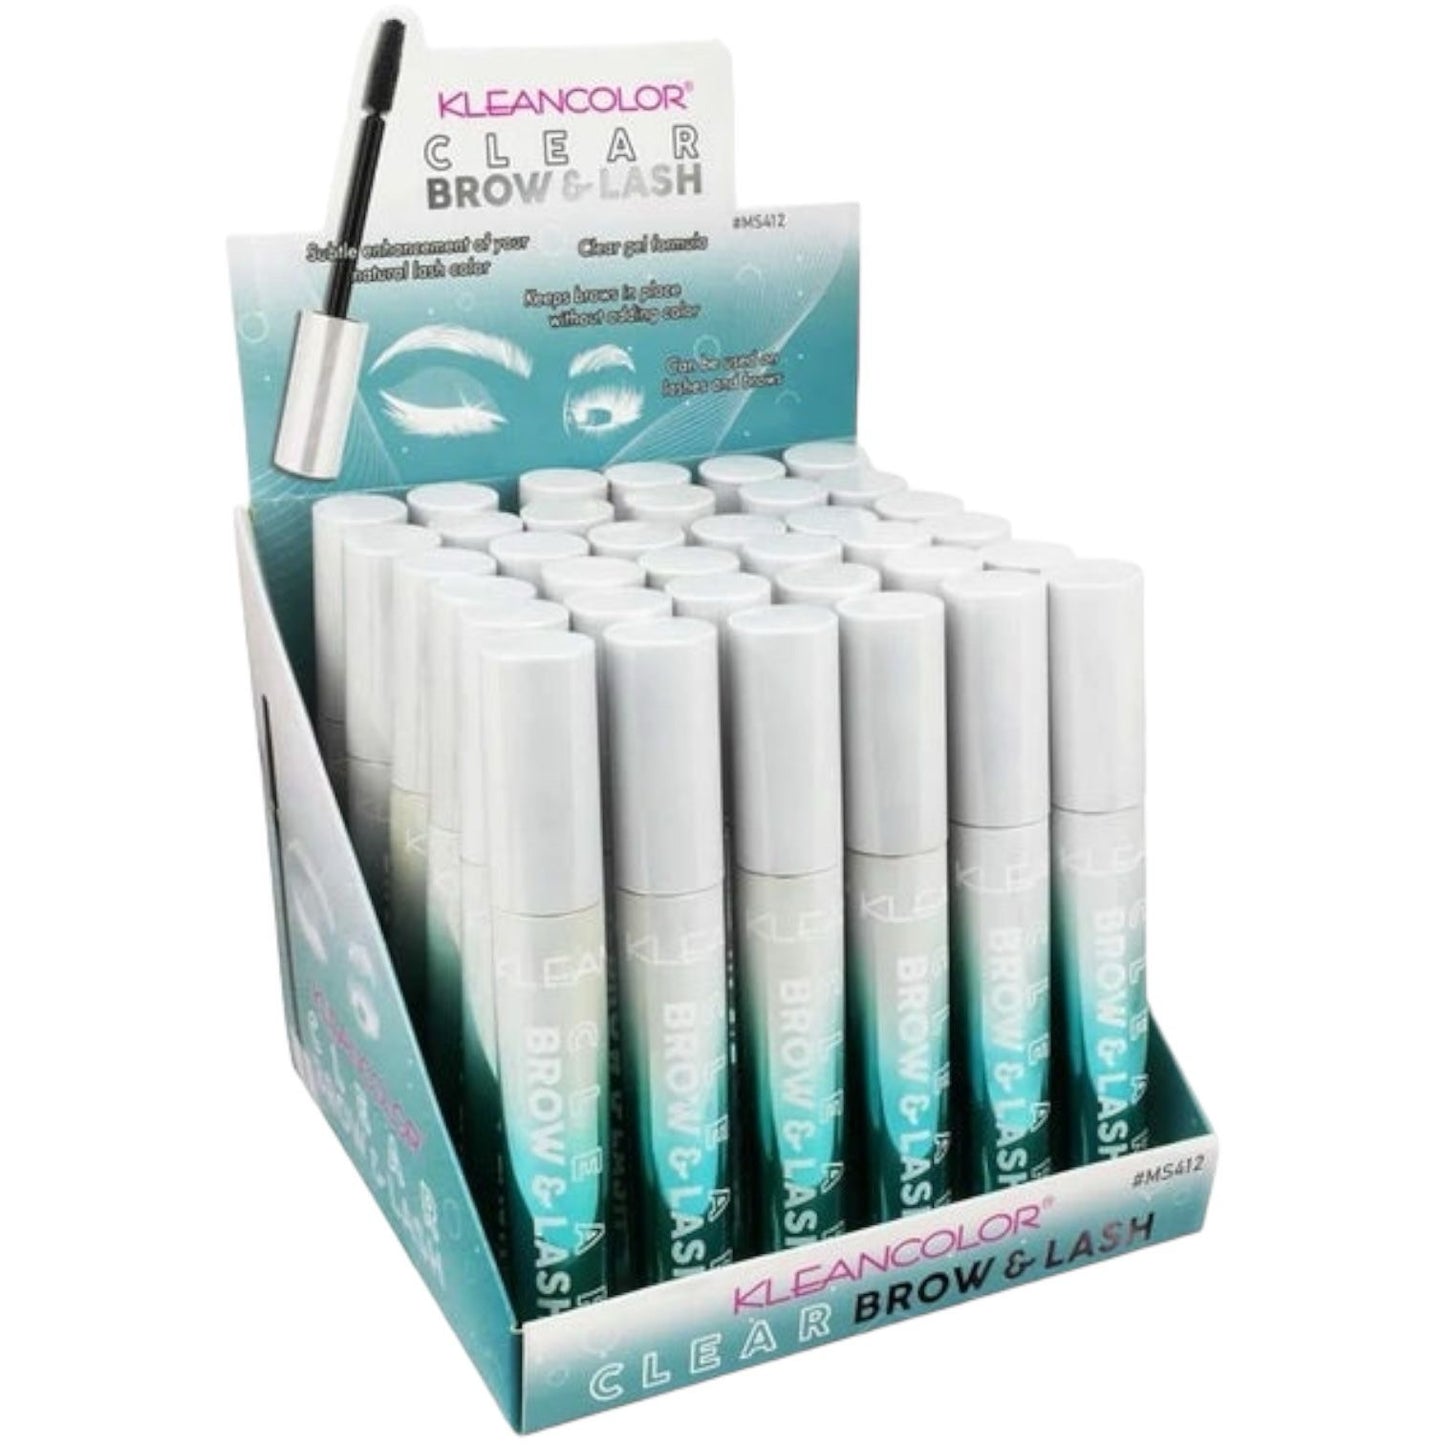 KLEANCOLOR CLEAR BROW AND LASH MASCARA MS412 R51